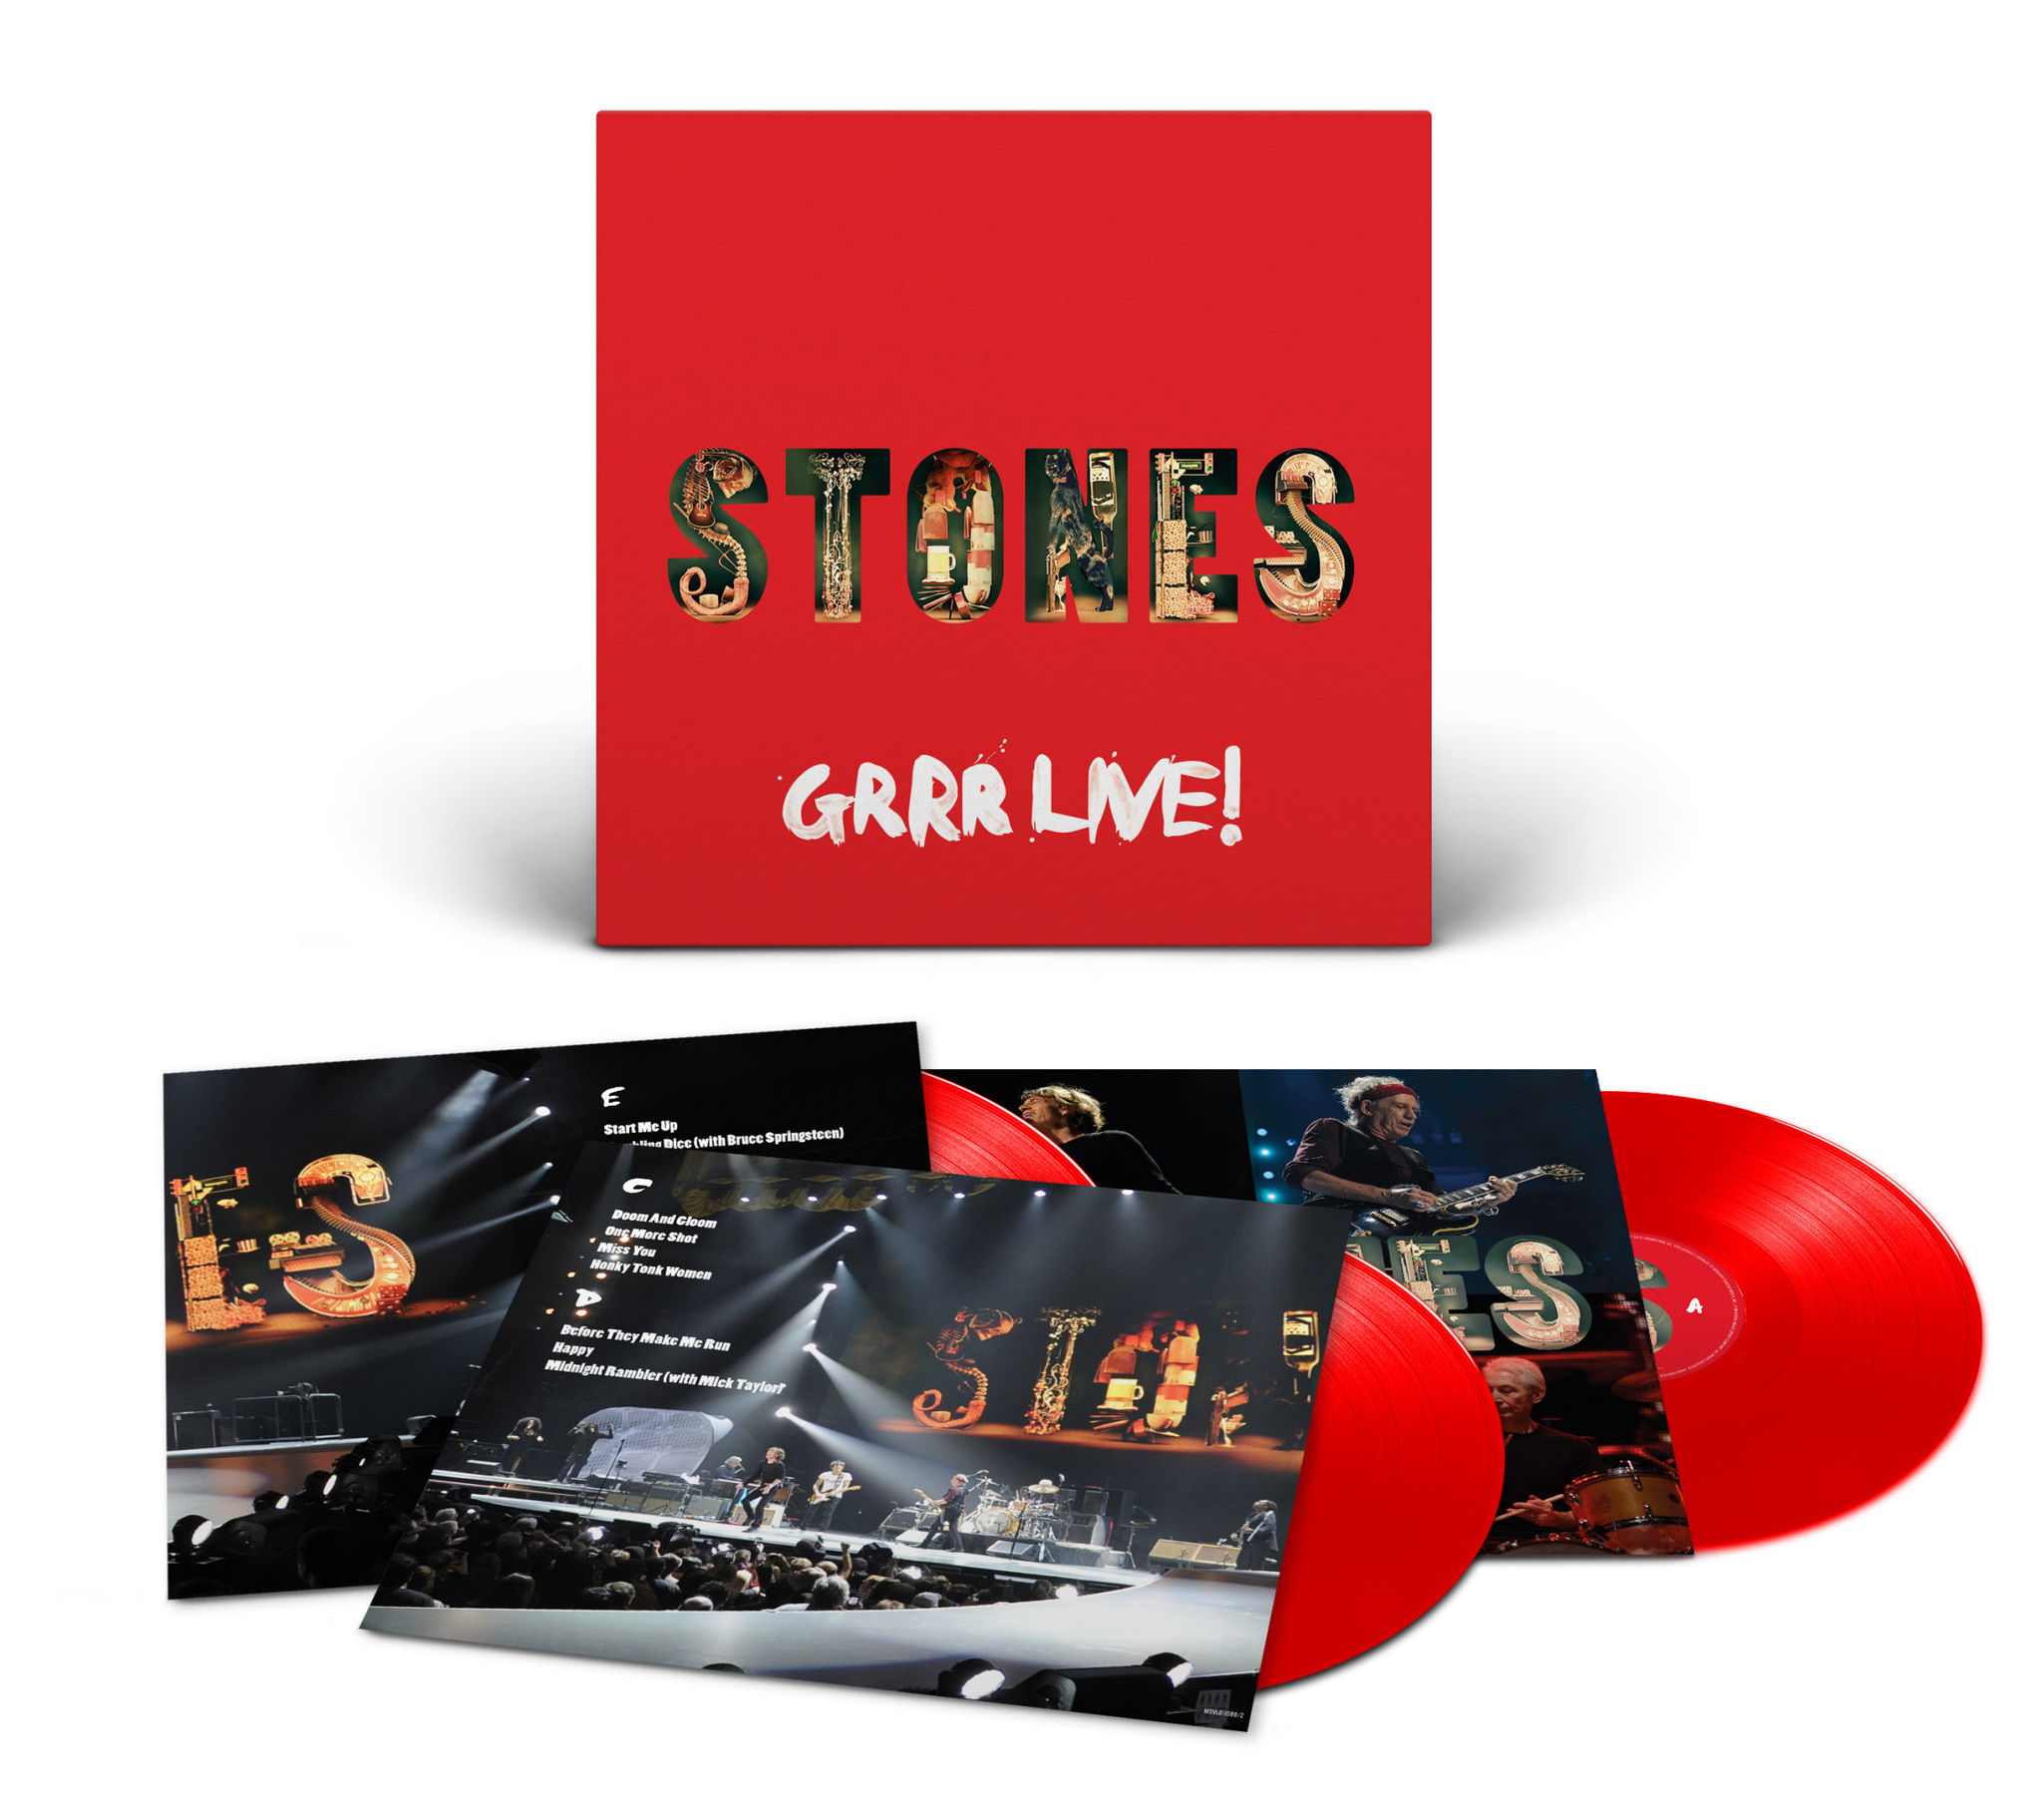 The Rolling Stones recapture their 50 & Counting tour on new live album